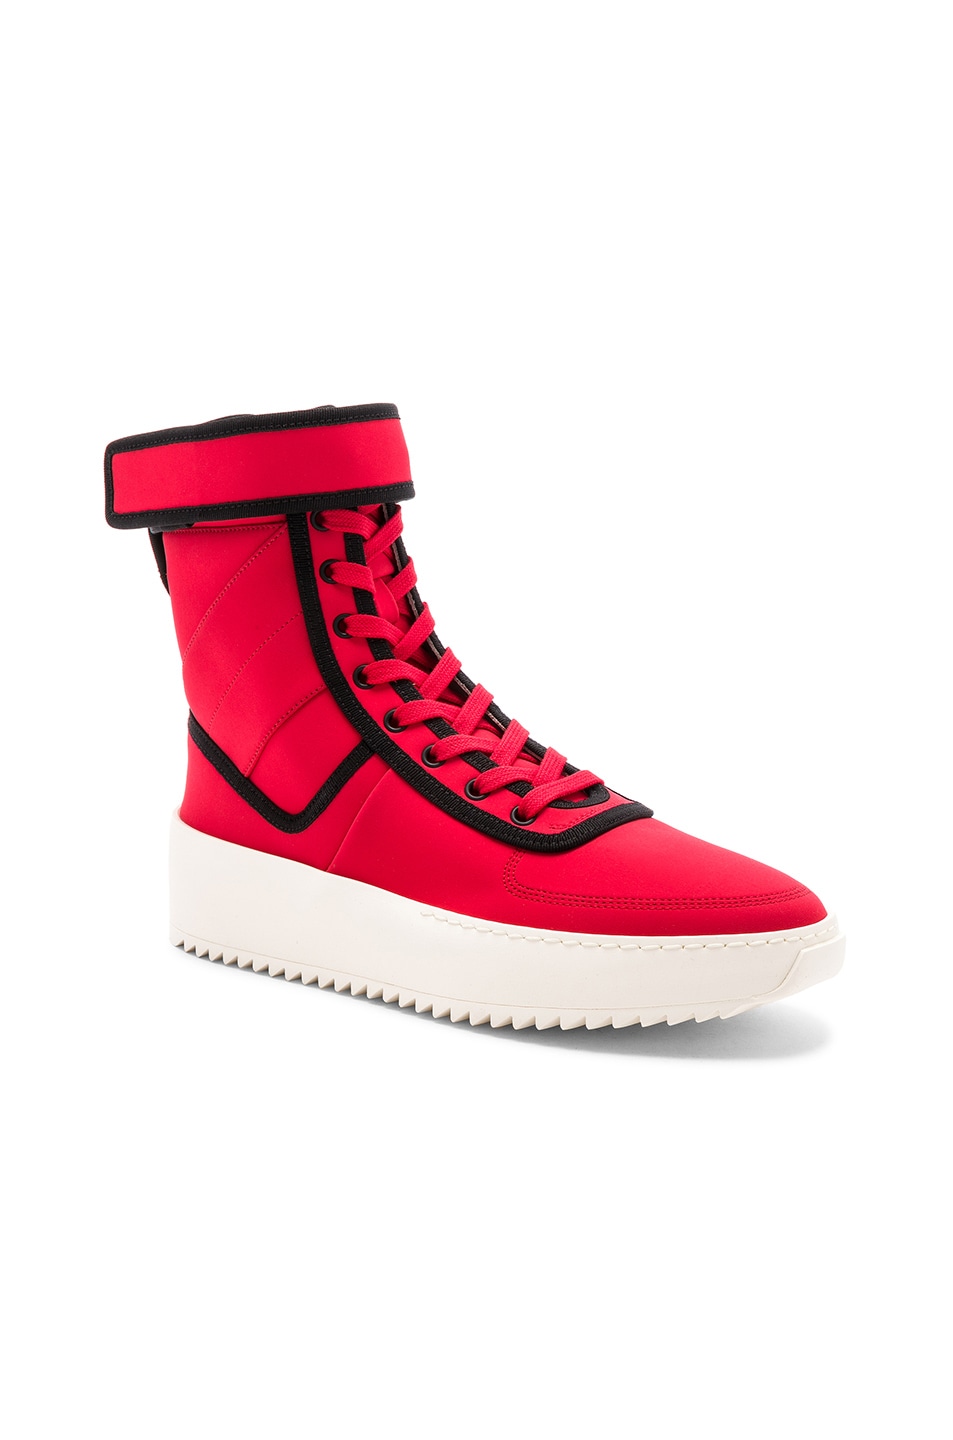 Image 1 of Fear of God Neoprene Military Sneakers in Infrared